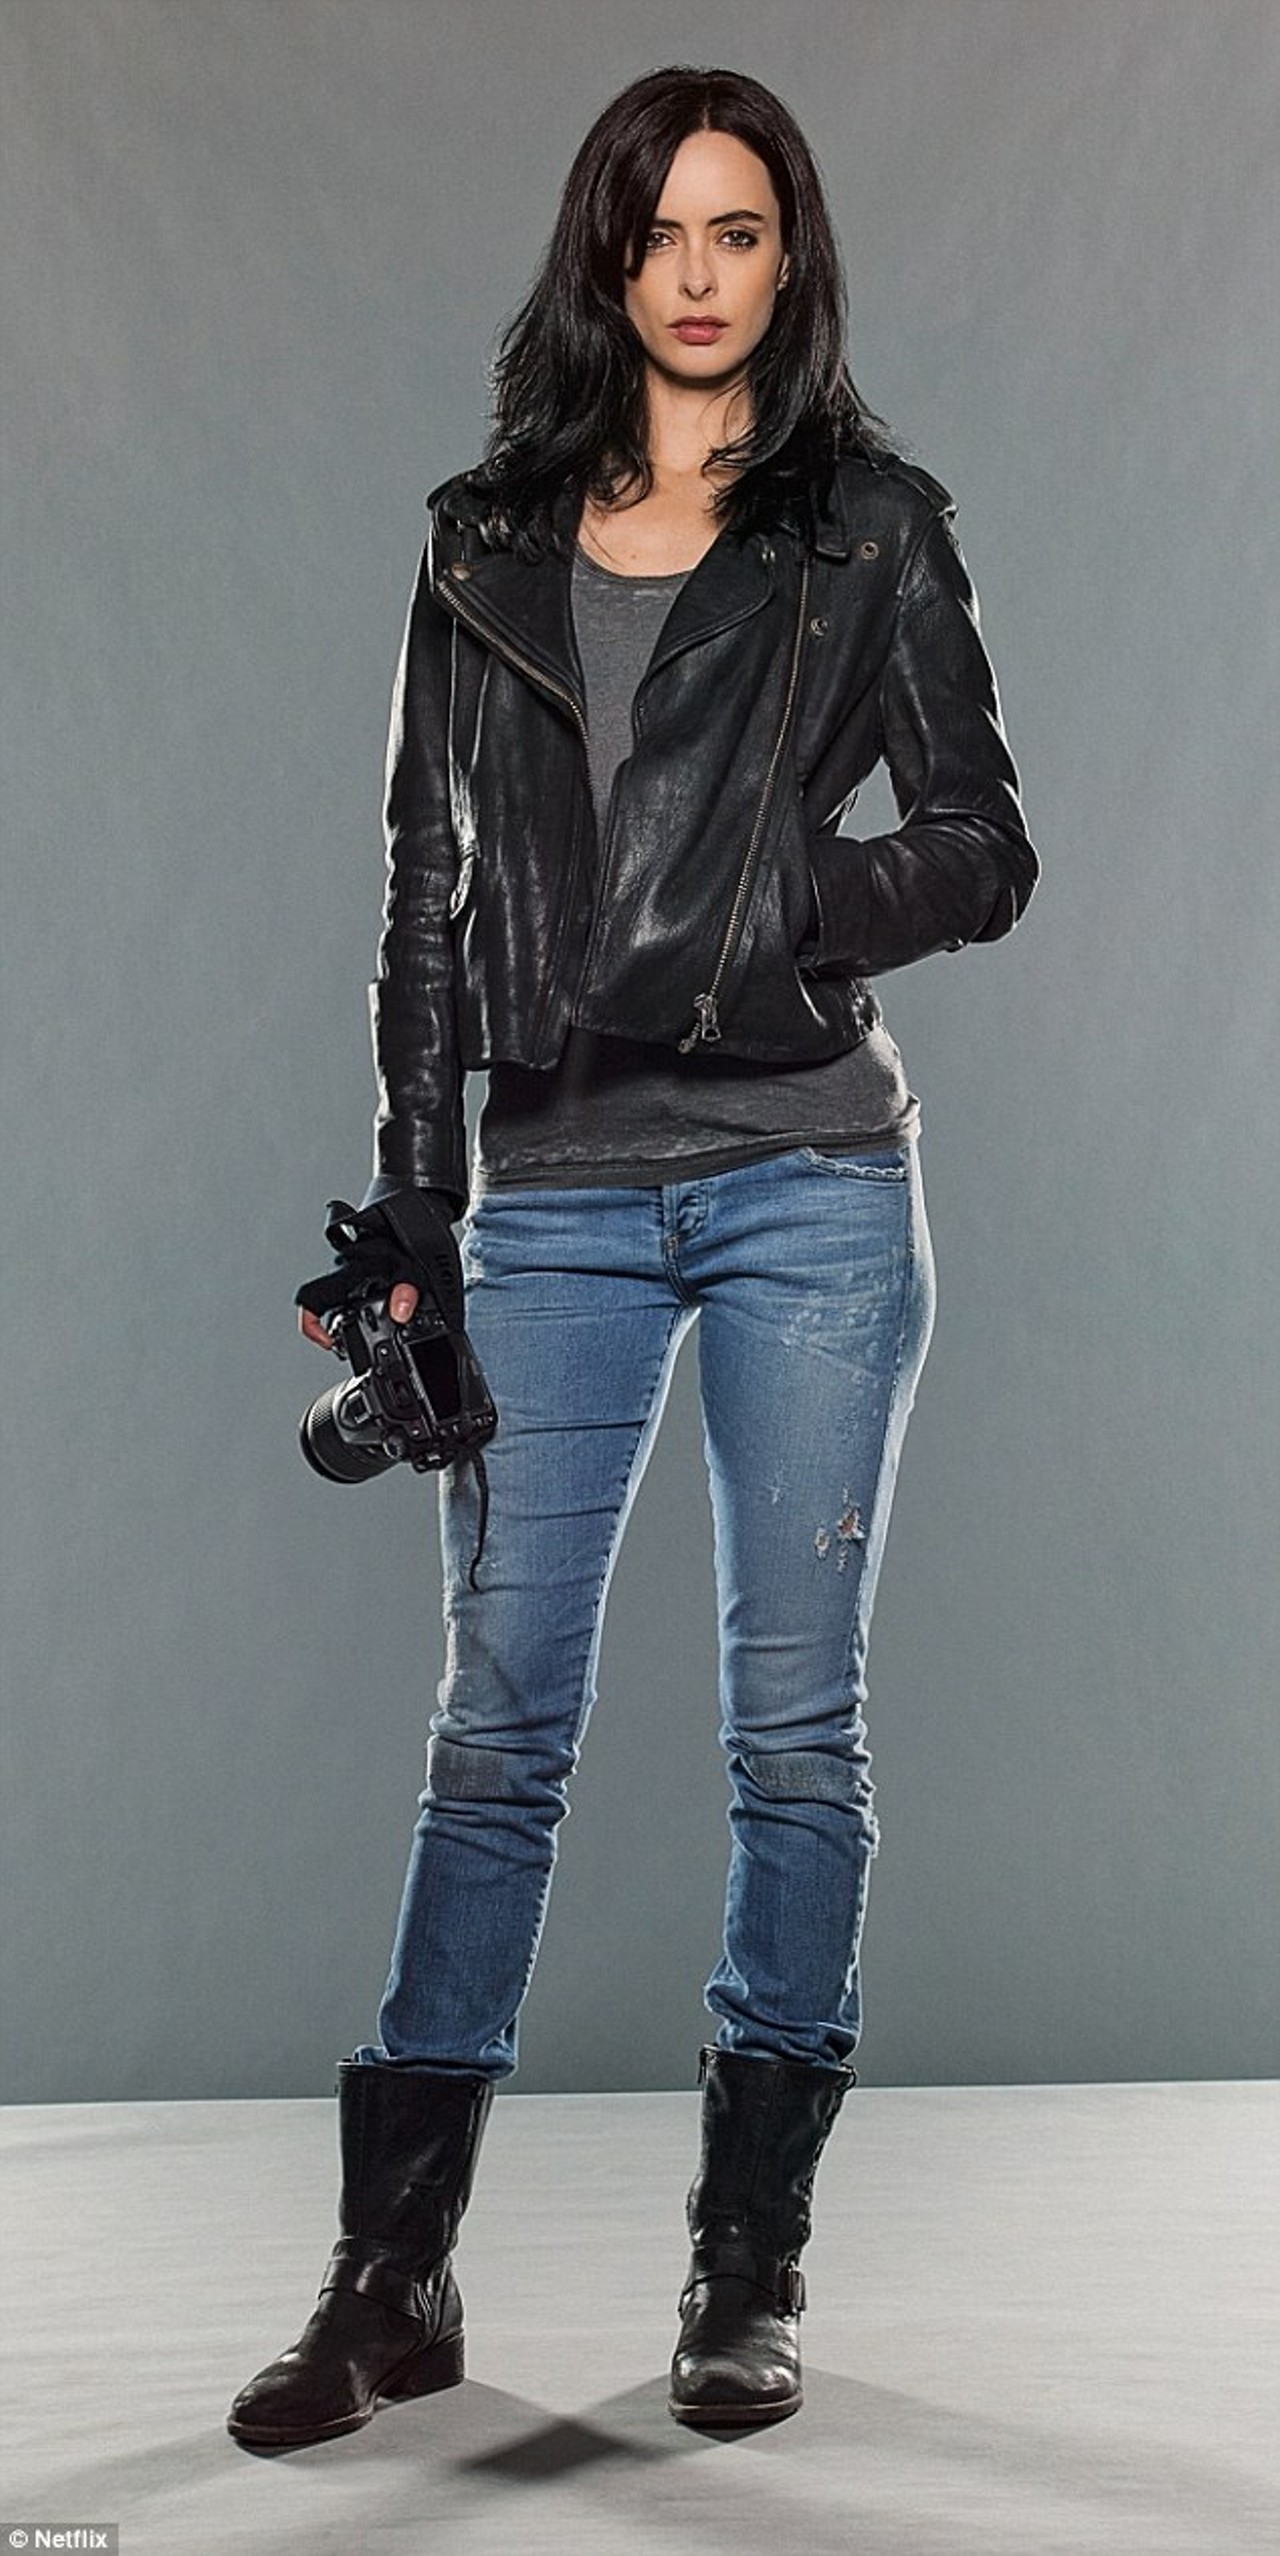 To Be Jessica Jones from the hit Netflix series  Jessica Jones you need a leather jacket, grey shirt, black boots, and blue jeans.( Bonus points for the camera.) 
Photo courtesy of Netflix 